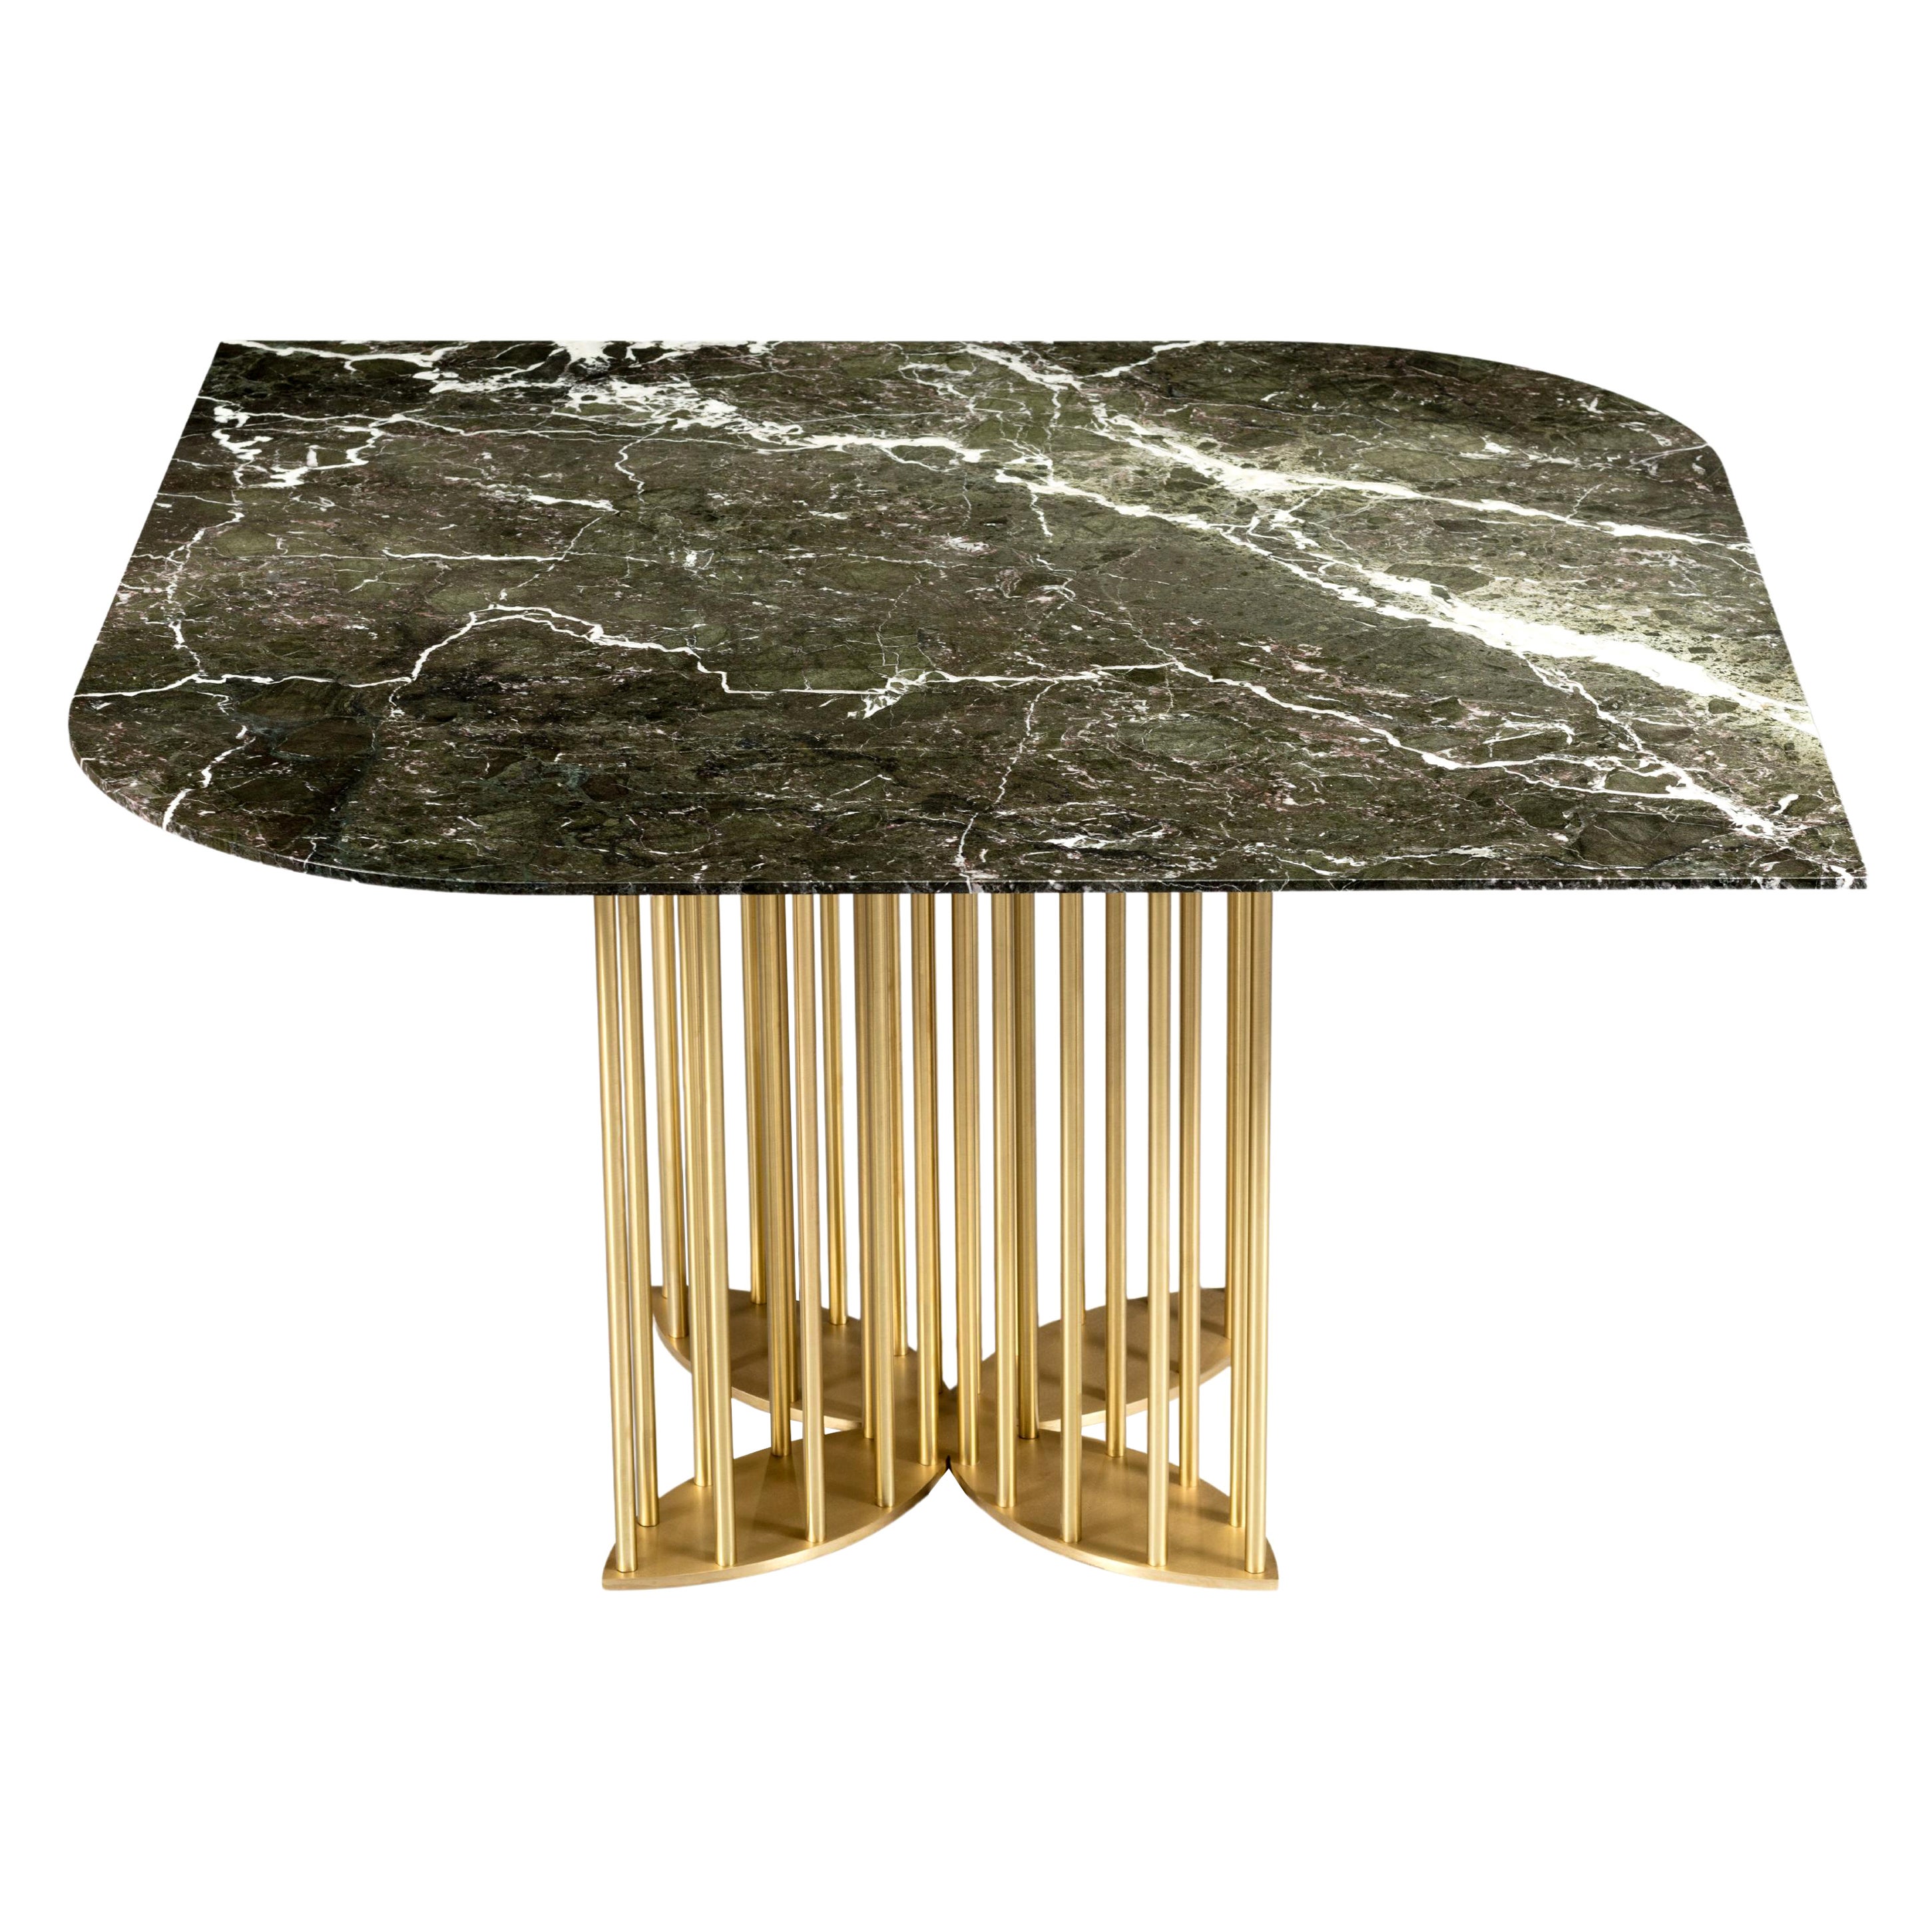 Naiad Designer Marble Dining Table with Brass or Stainless Steel Leg Custom Made